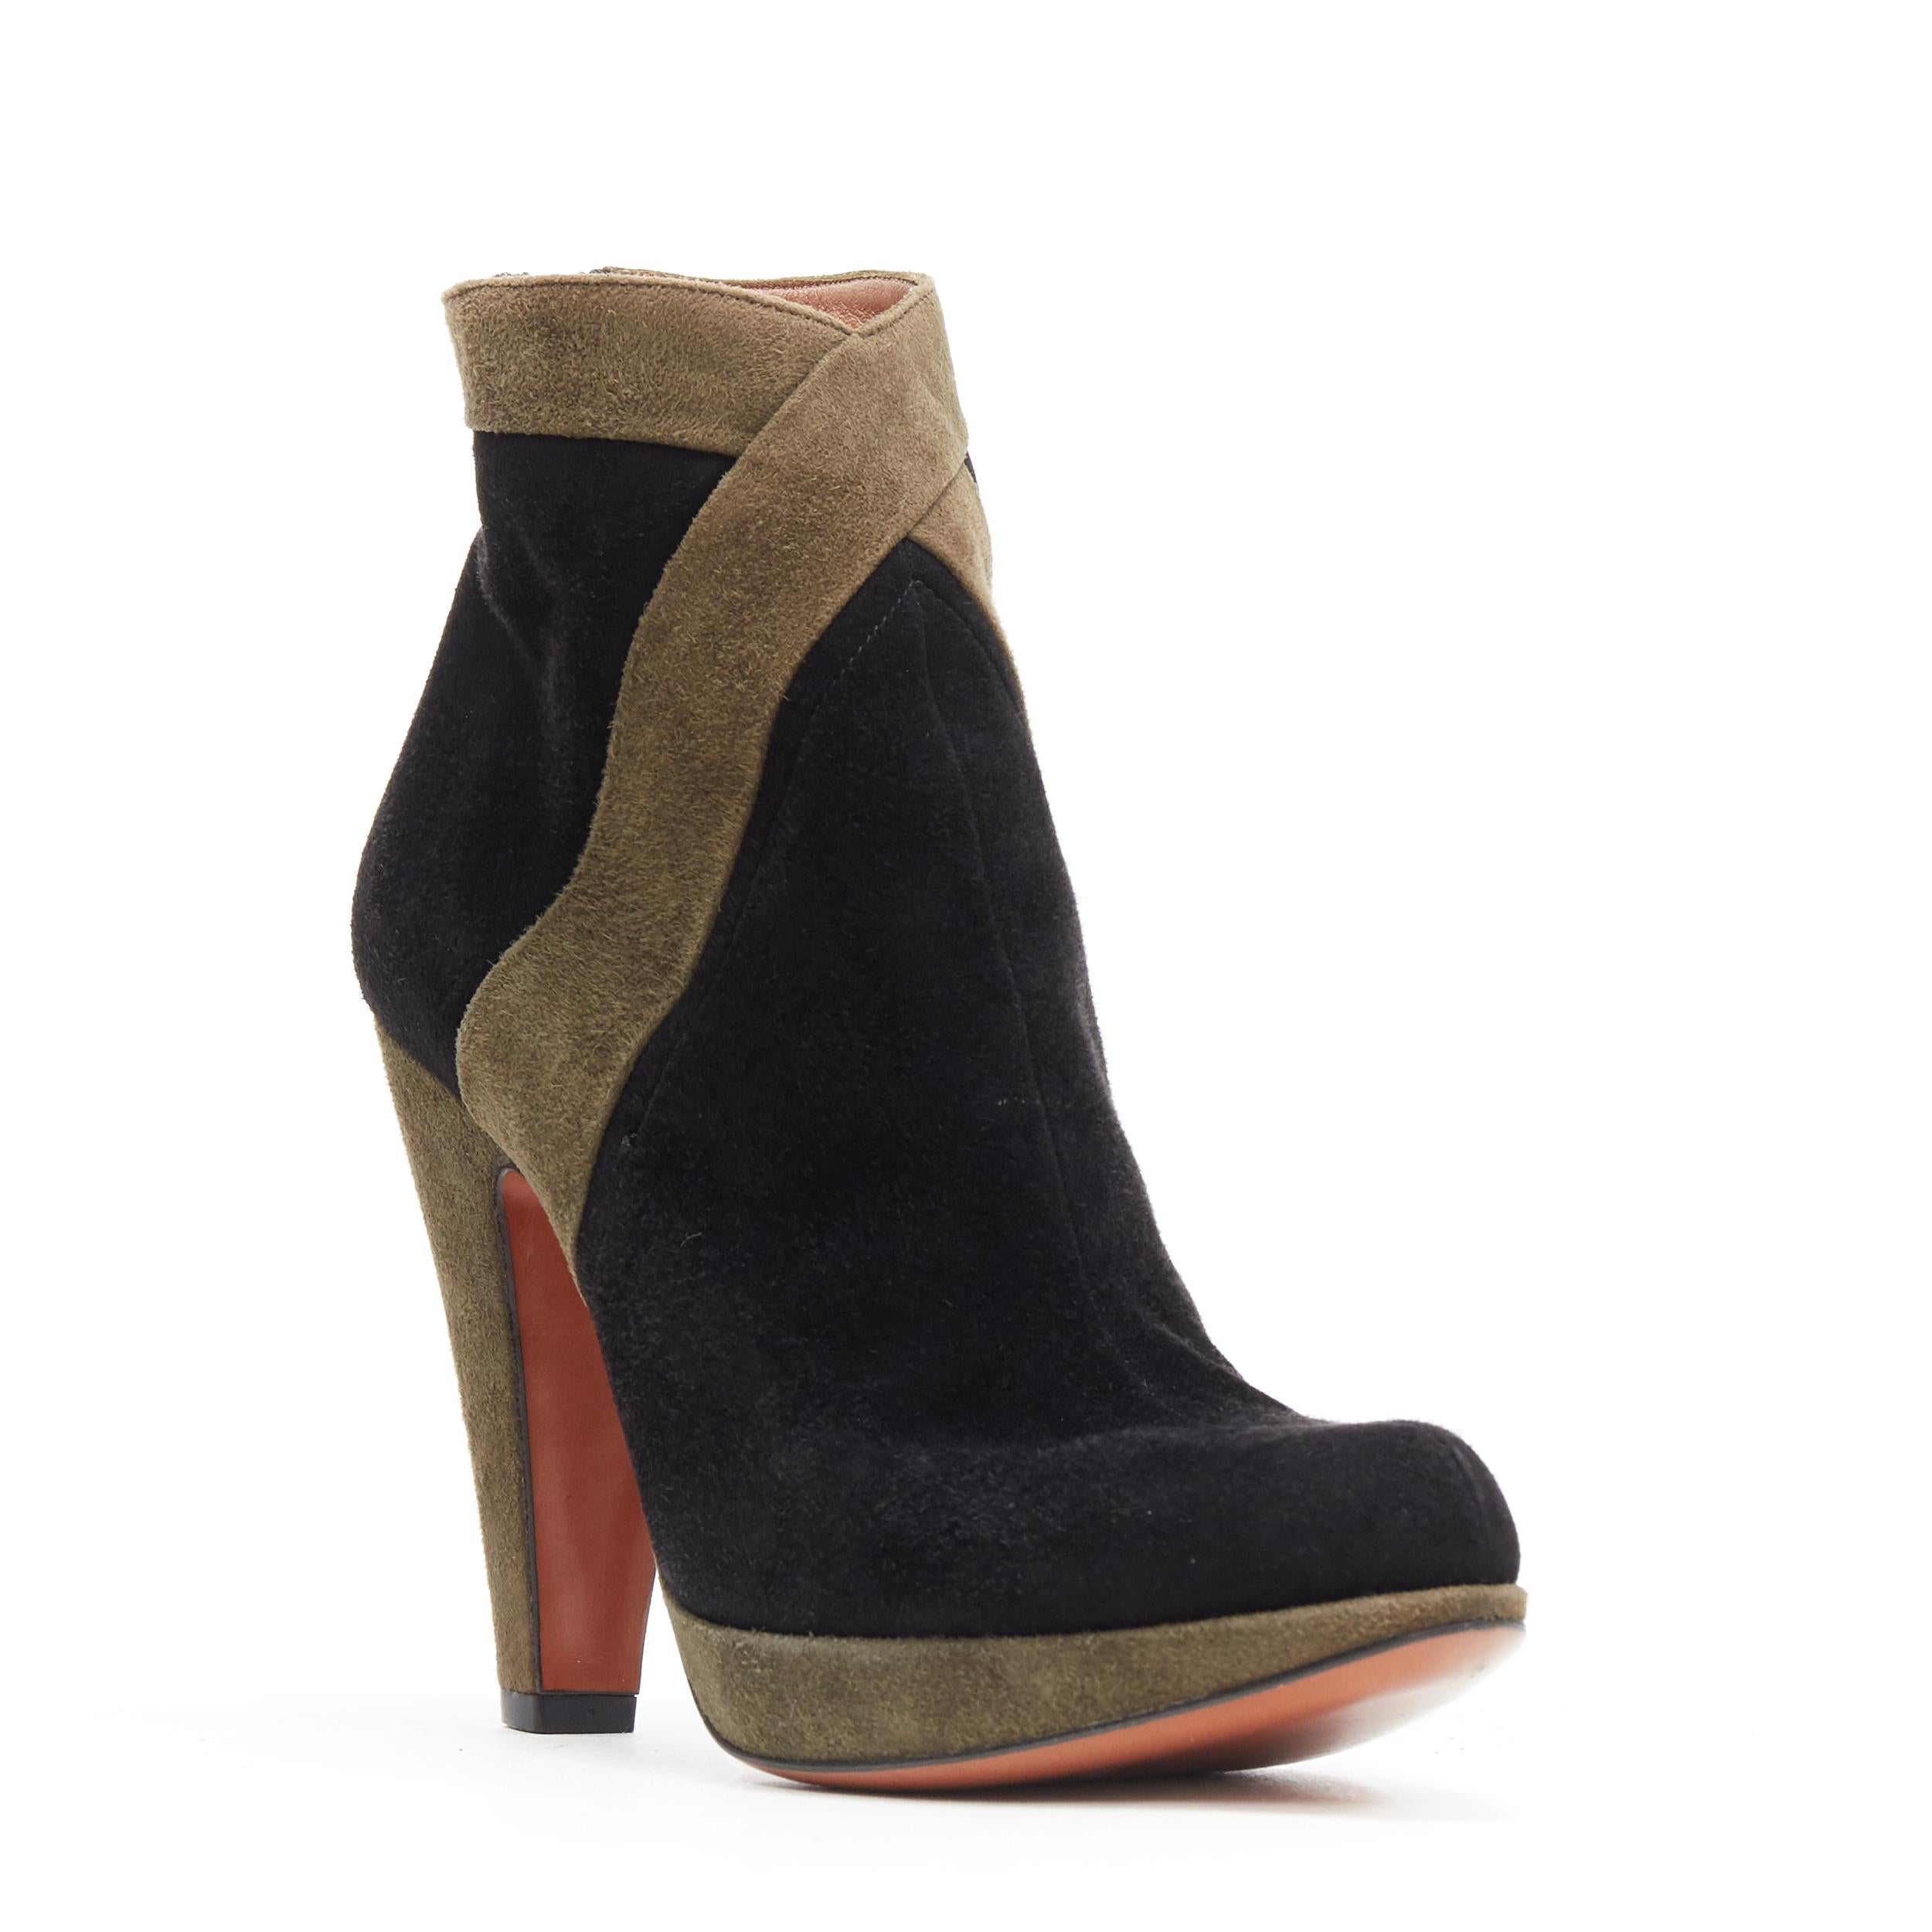 ALAIA black green suede leather cross strap platform high heel ankle bootie EU36
Brand: Alaia
Designer: Azzedine Alaia
Model Name / Style: Ankle bootie
Material: Suede
Color: Black and green
Pattern: Solid
Closure: Zip
Extra Detail: Ultra High (4 in